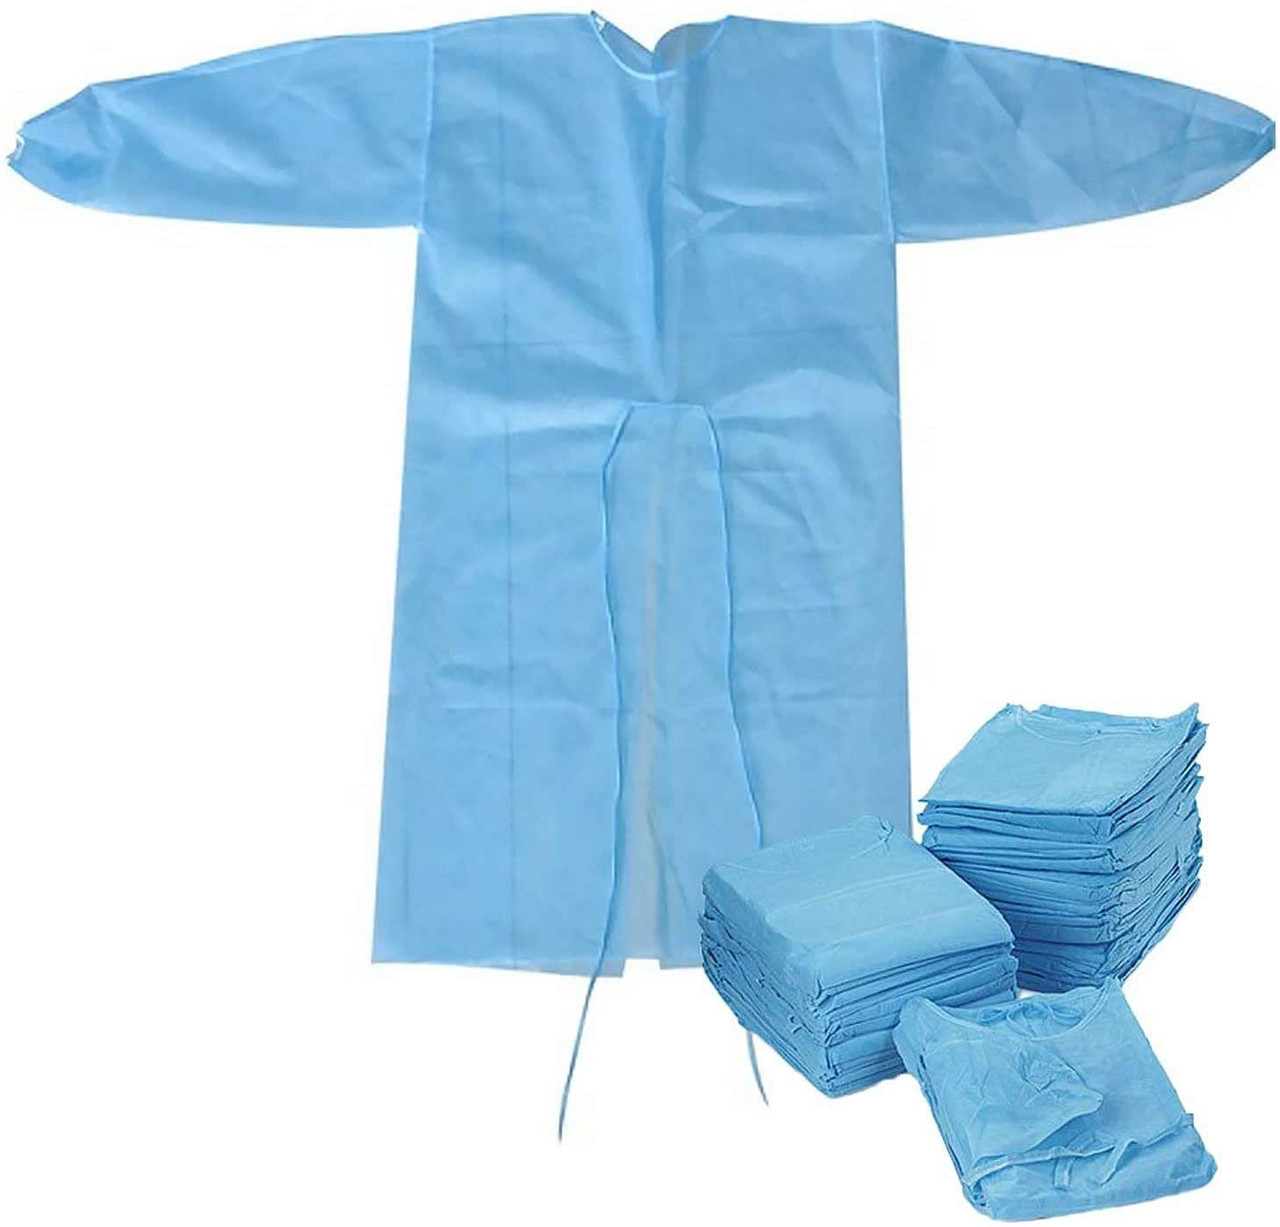 Disposable Gowns 47" Long. Pack of 30 Blue Polypropylene 50gsm Frocks. Large Body Protective Robes 